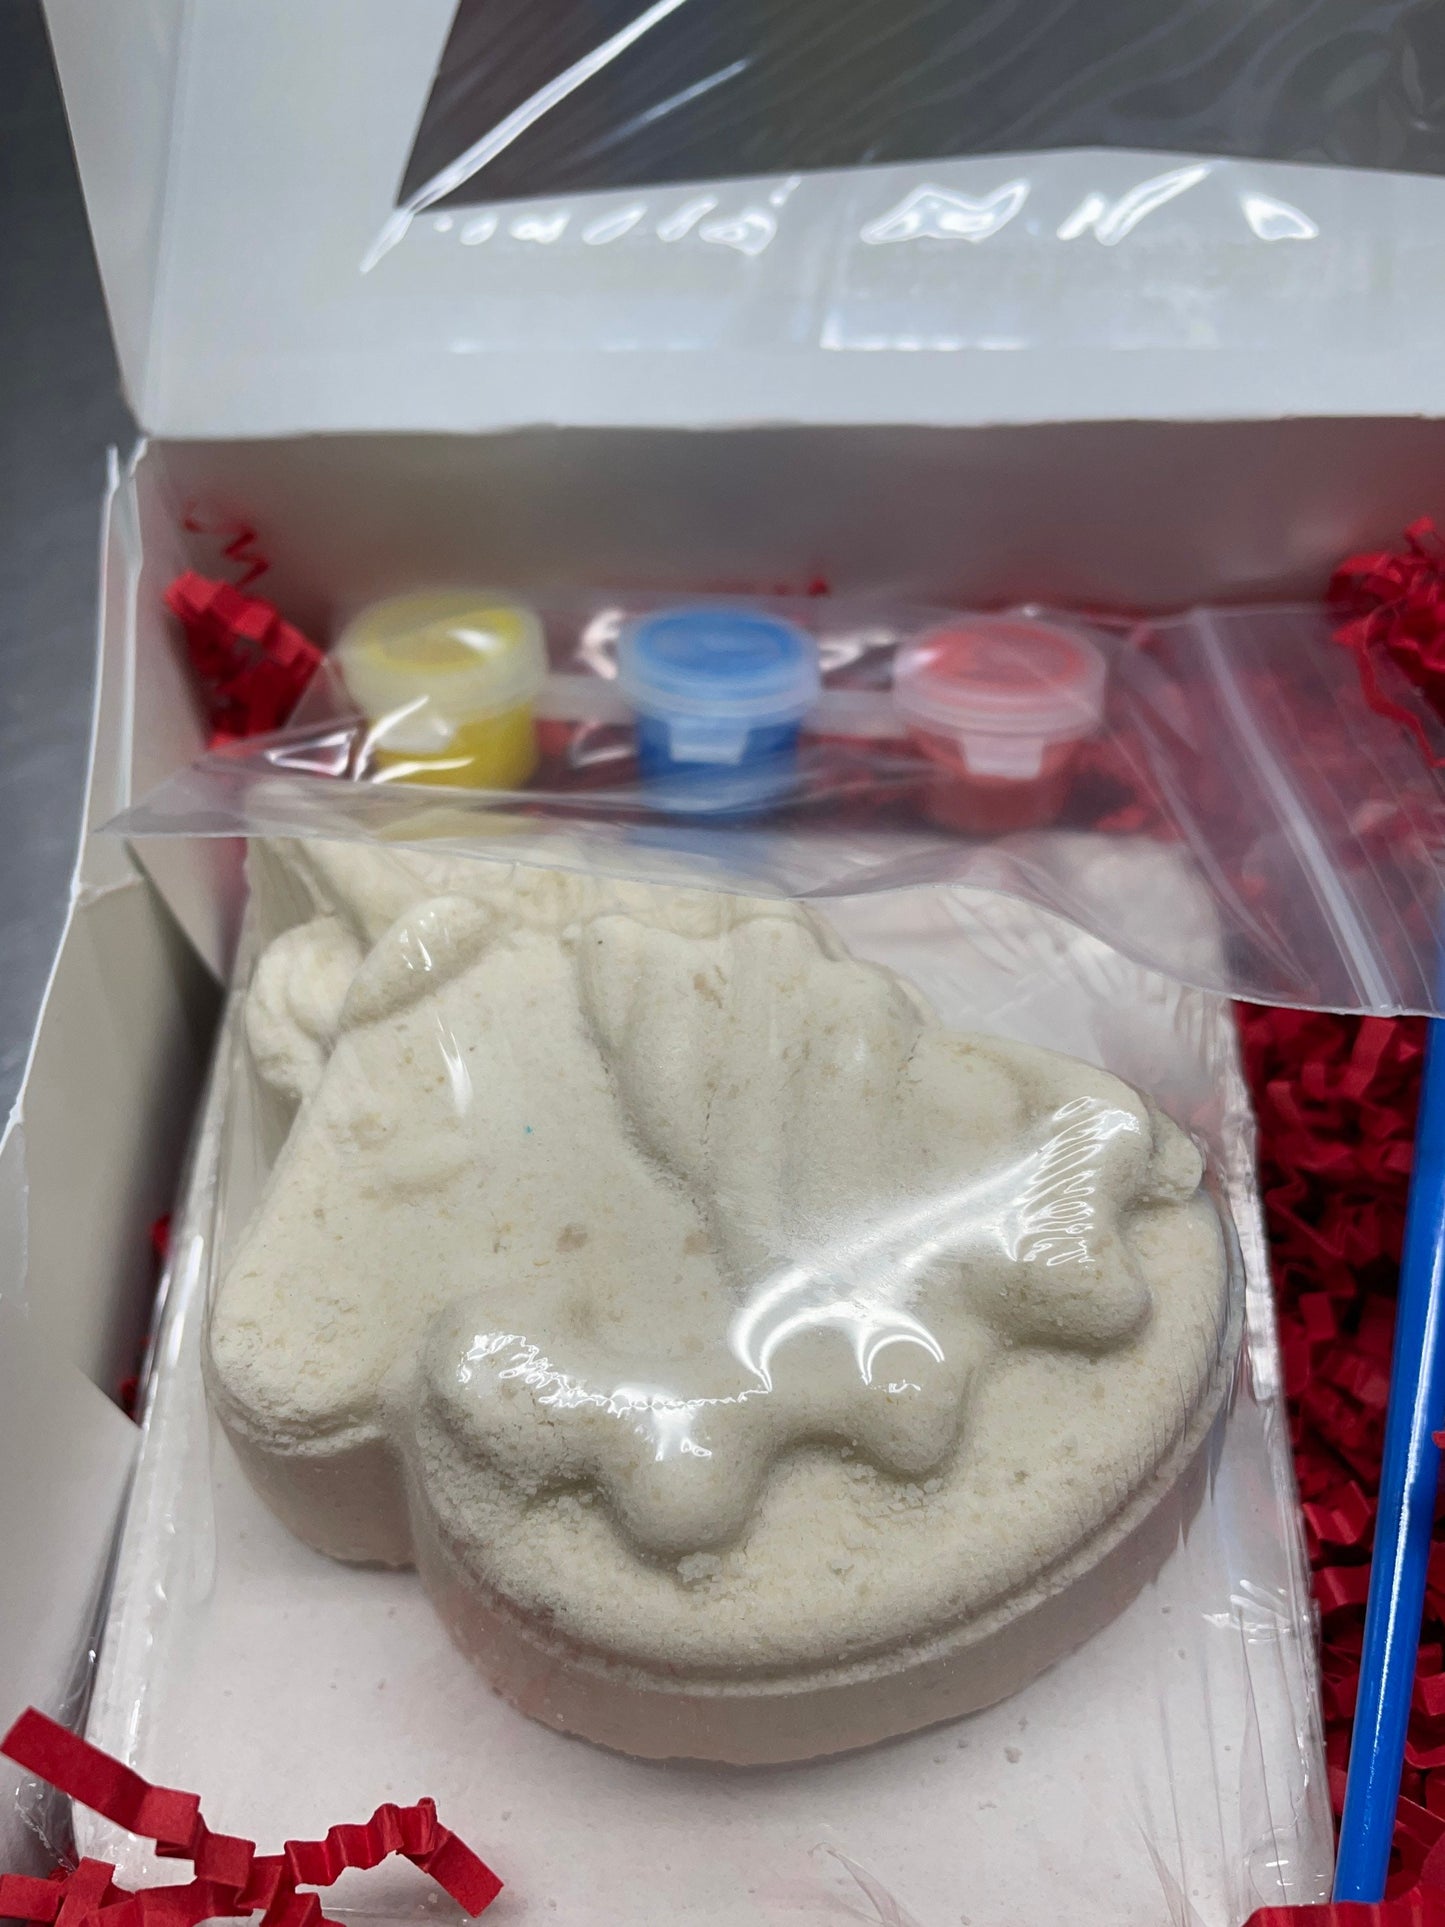 A photo of a box with red bedding with a kit to paint your own bath bomb.